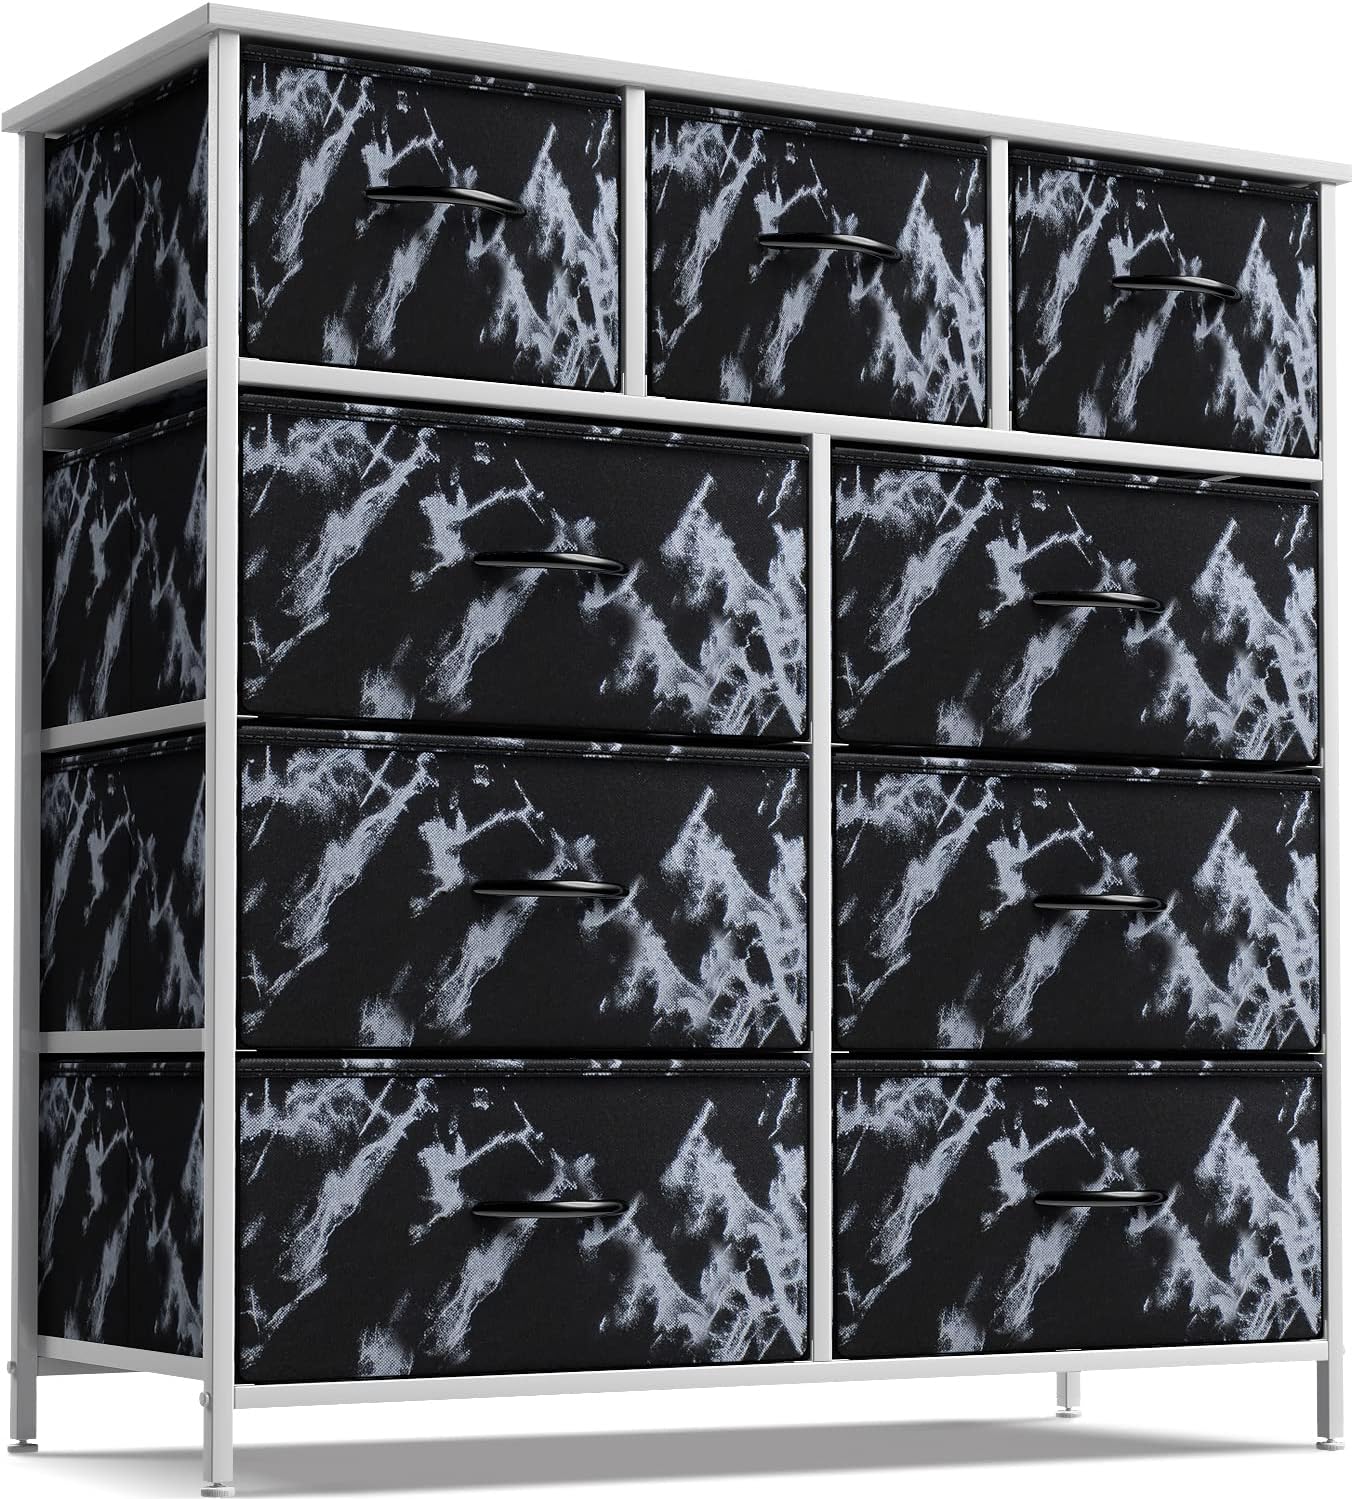 Sorbus Dresser with 9 Drawers - Furniture Storage Chest Tower Unit for Bedroom, Hallway, Closet, Office - Steel Frame, Wood Top, Fabric Bins (Marble Black  White Frame)